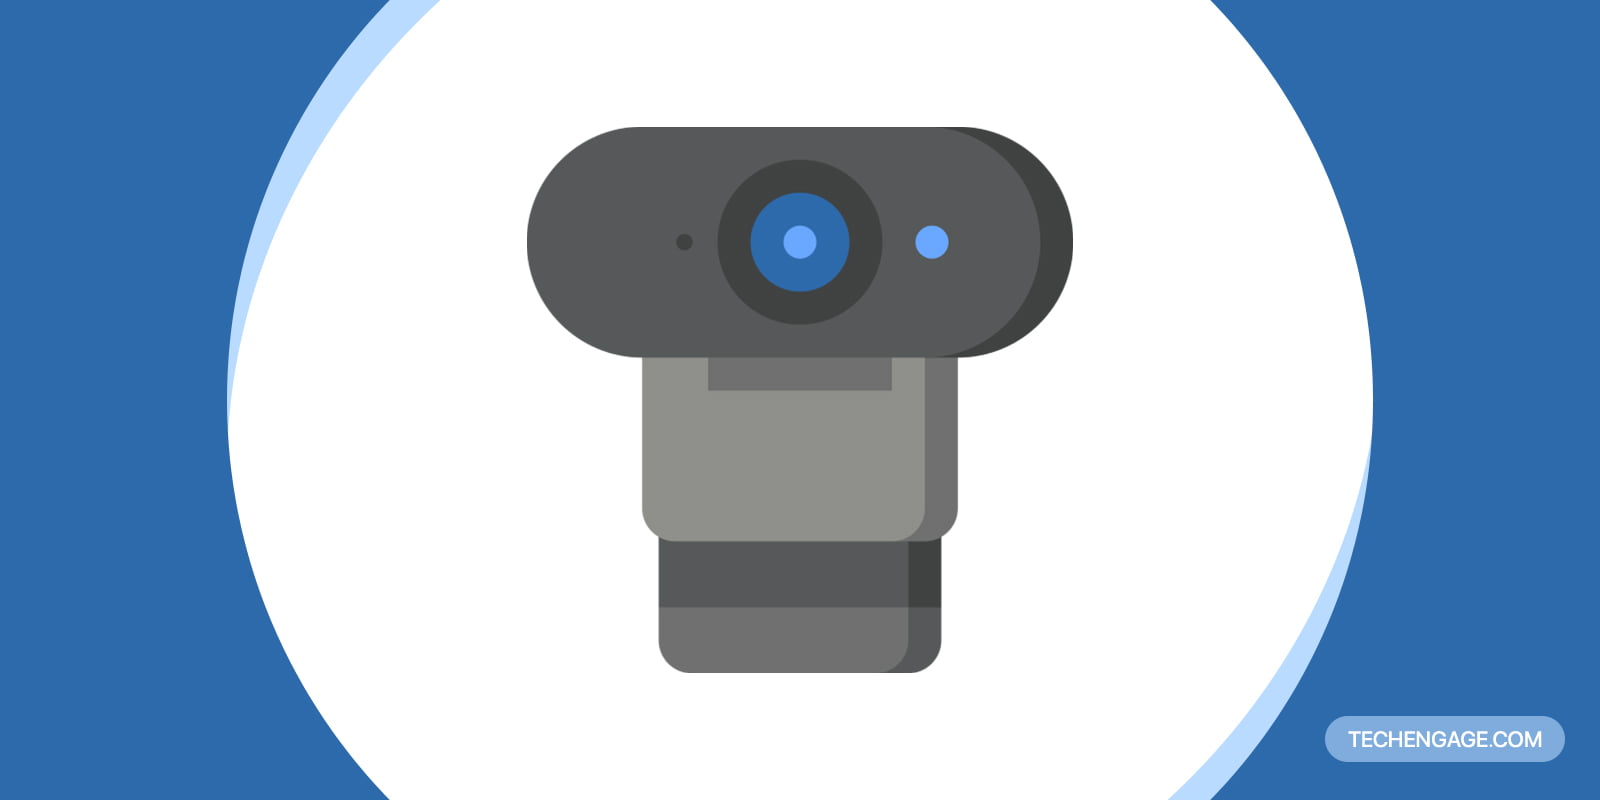 An illustration for best webcams for pc and laptop